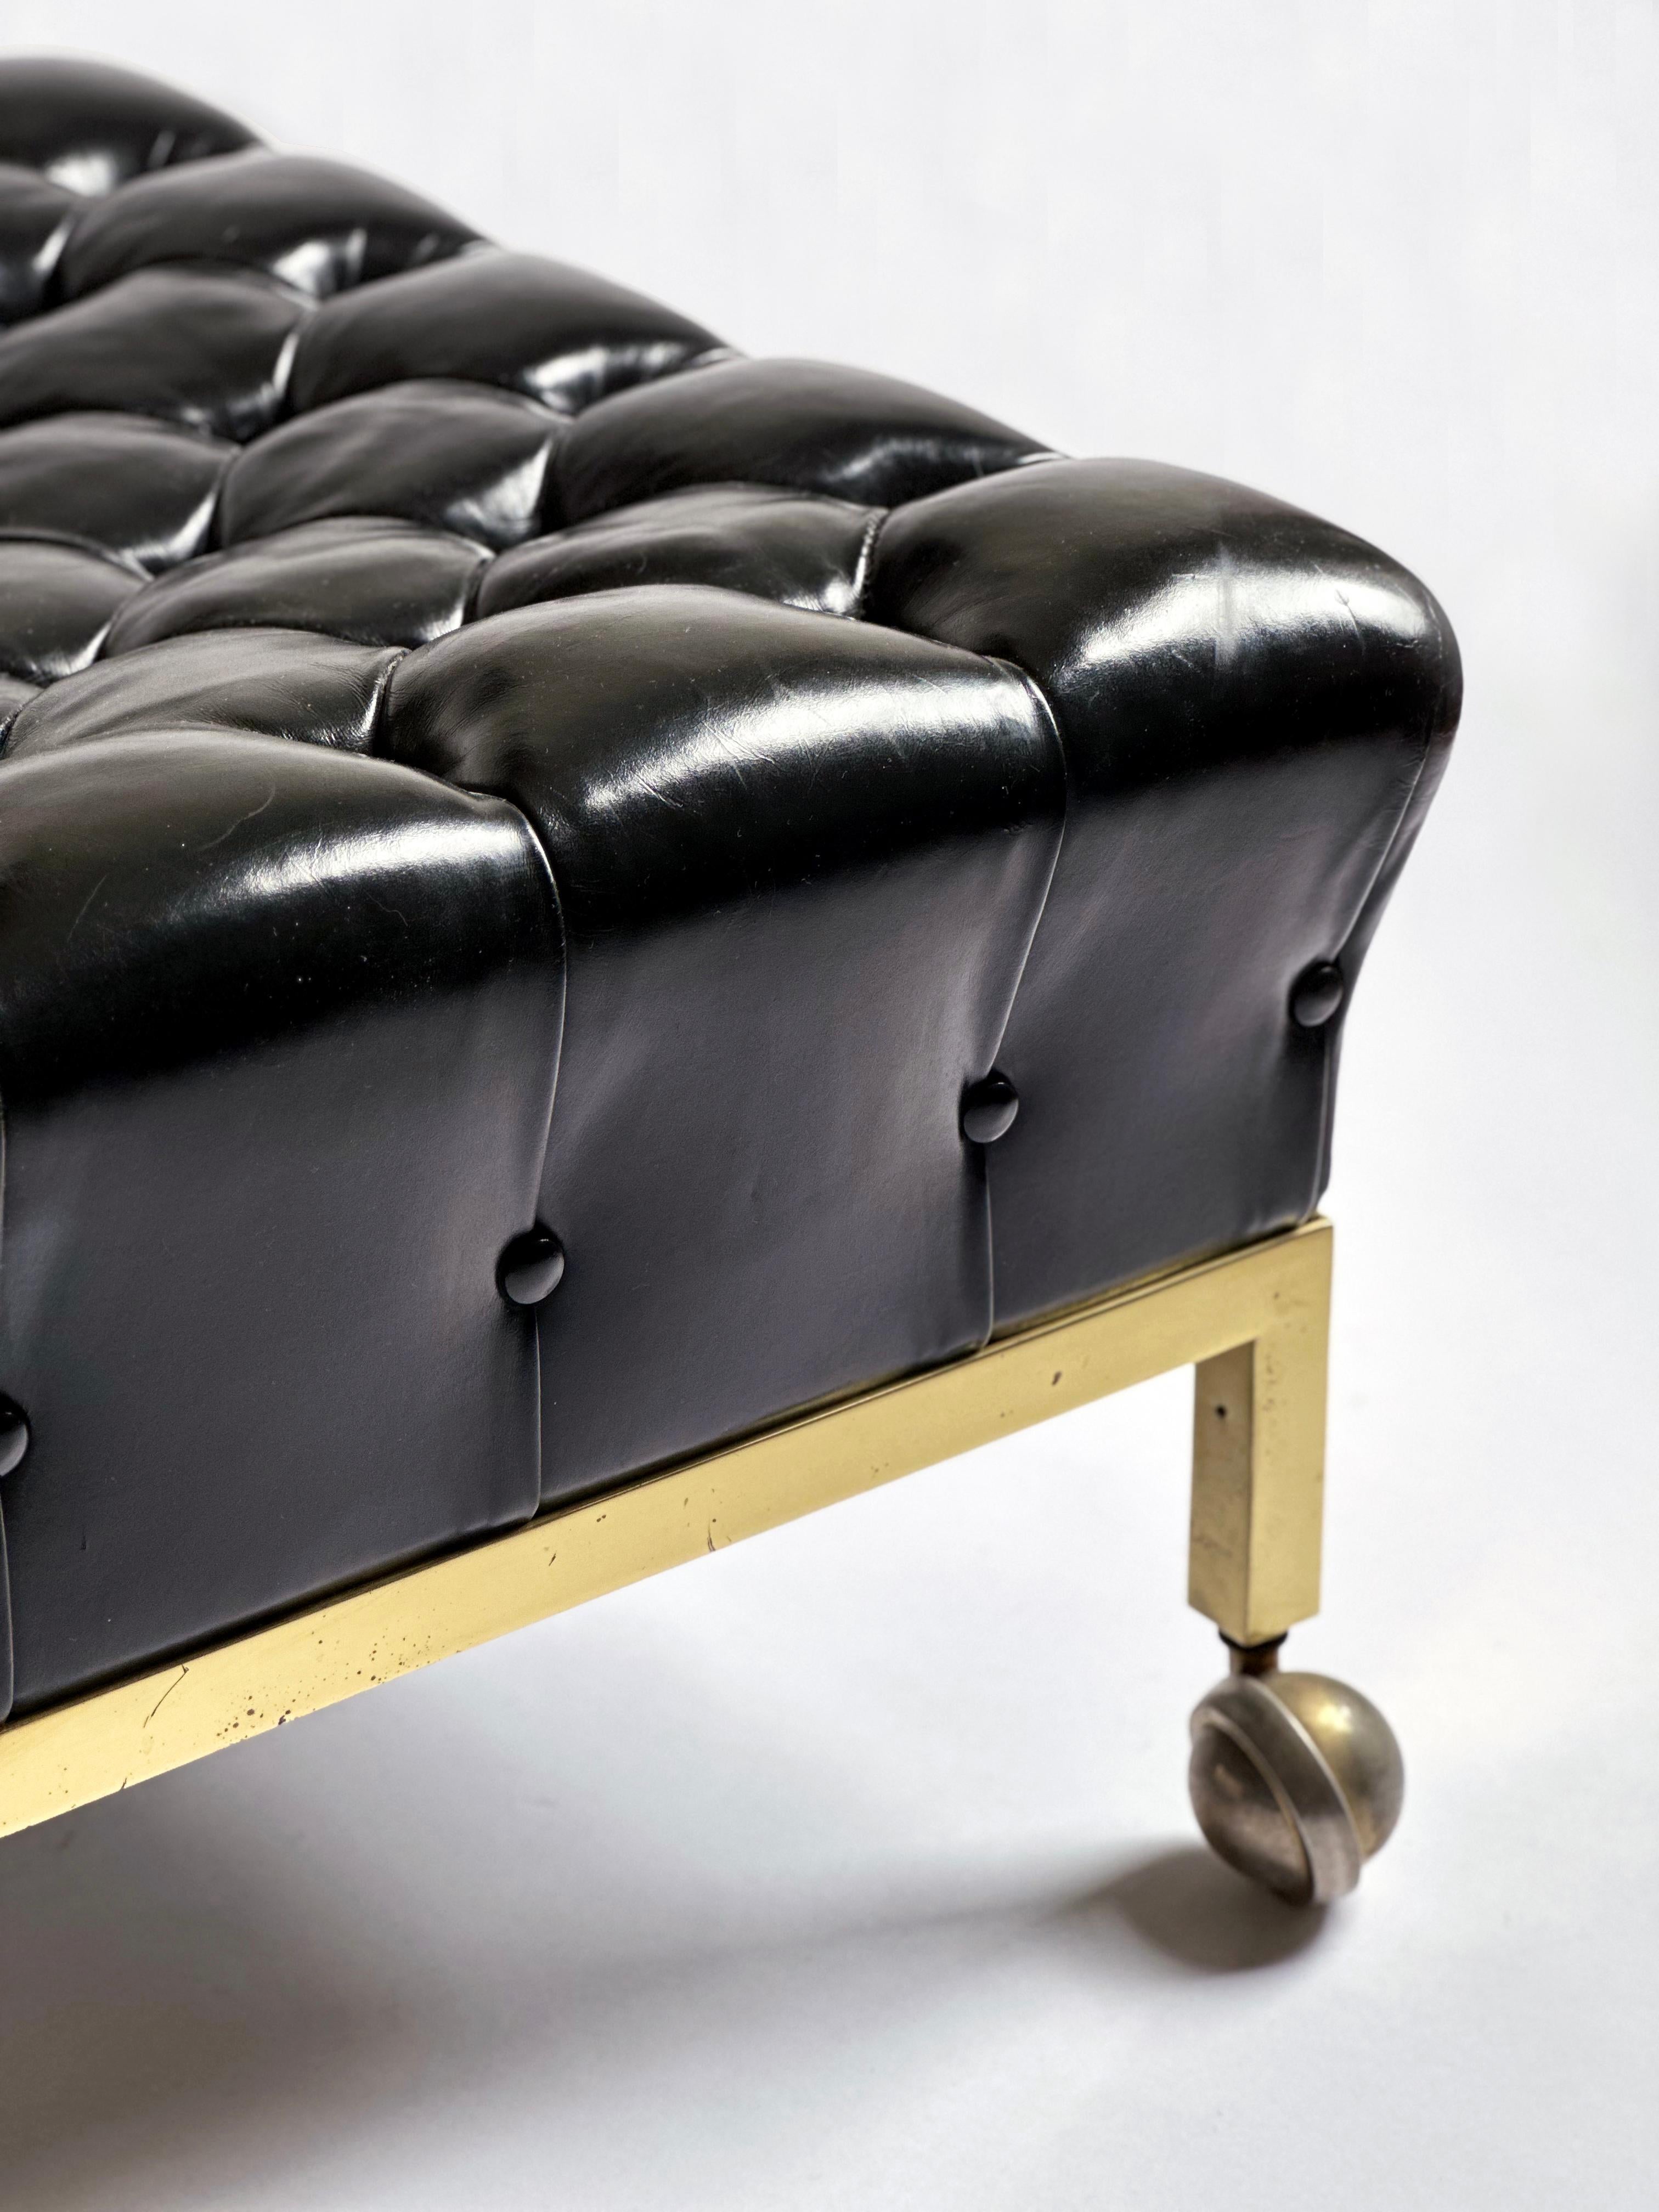 Mid-20th Century Brass Framed Biscuit Tufted Ottoman in Original Black Leather by Harvey Probber For Sale